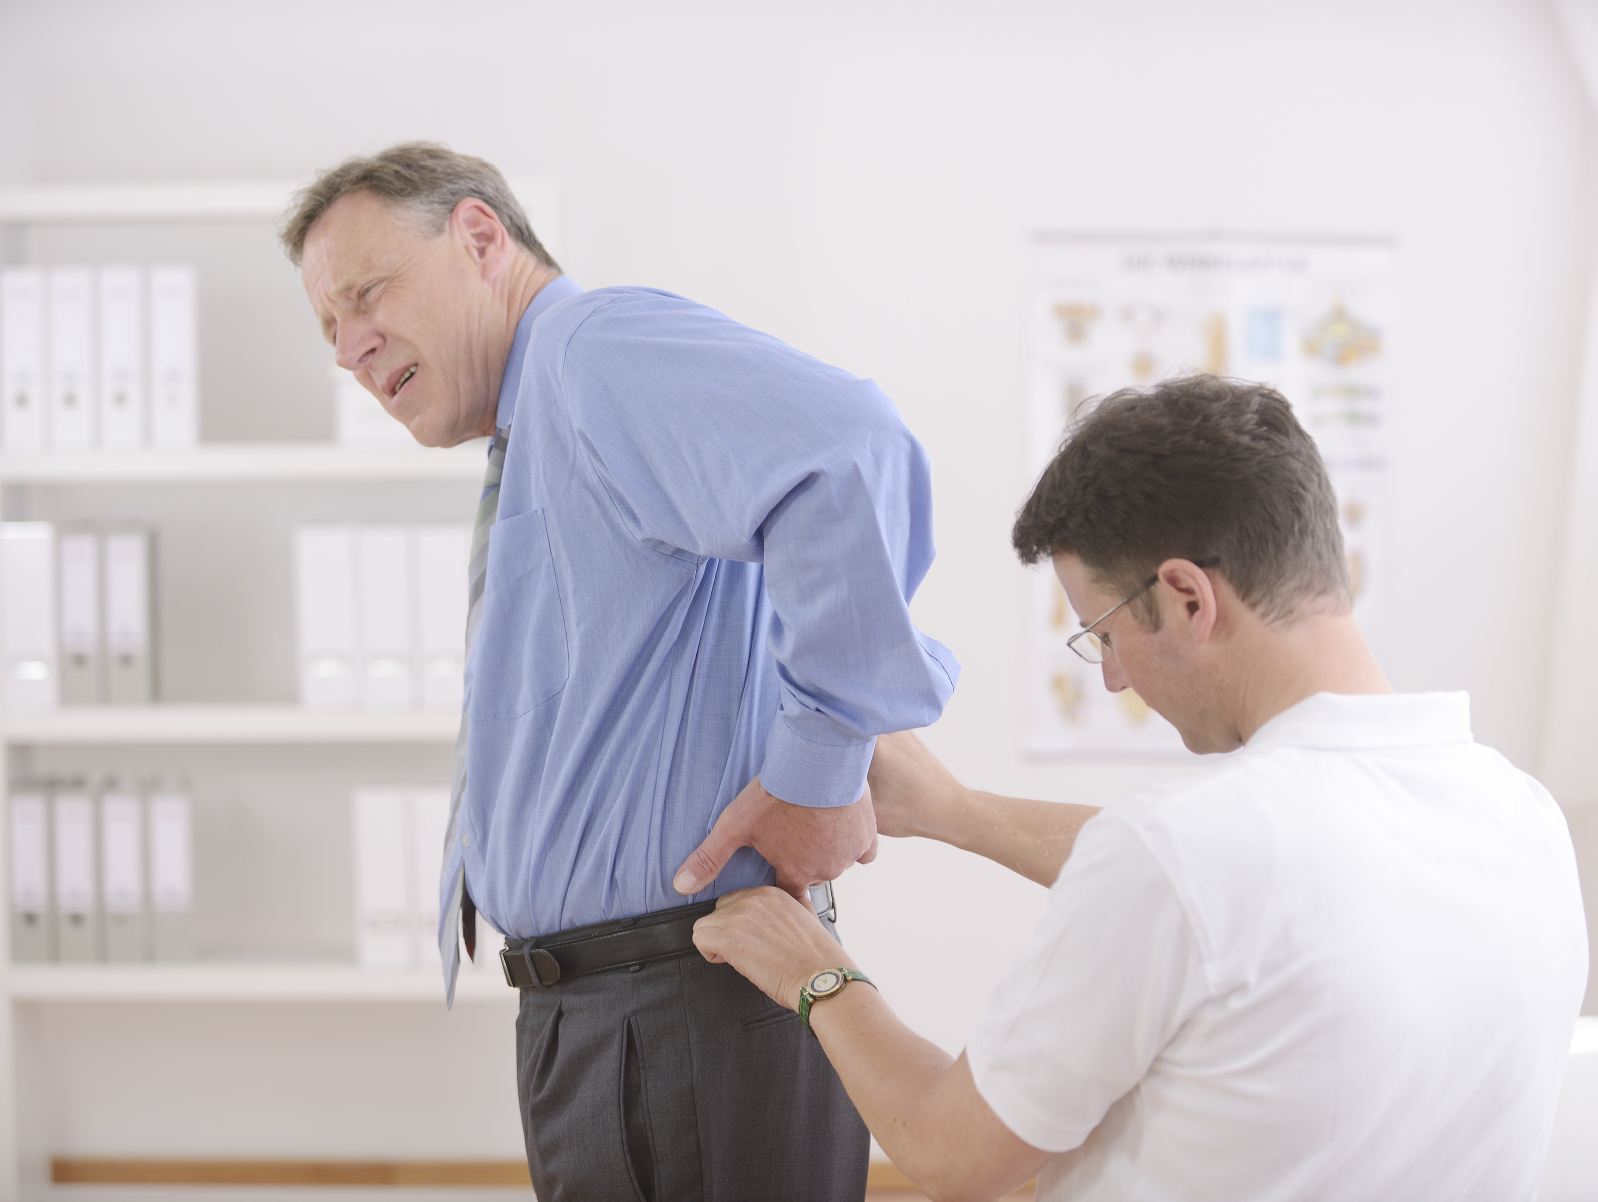 Chiropractor diagnosing patients back injury after car accident